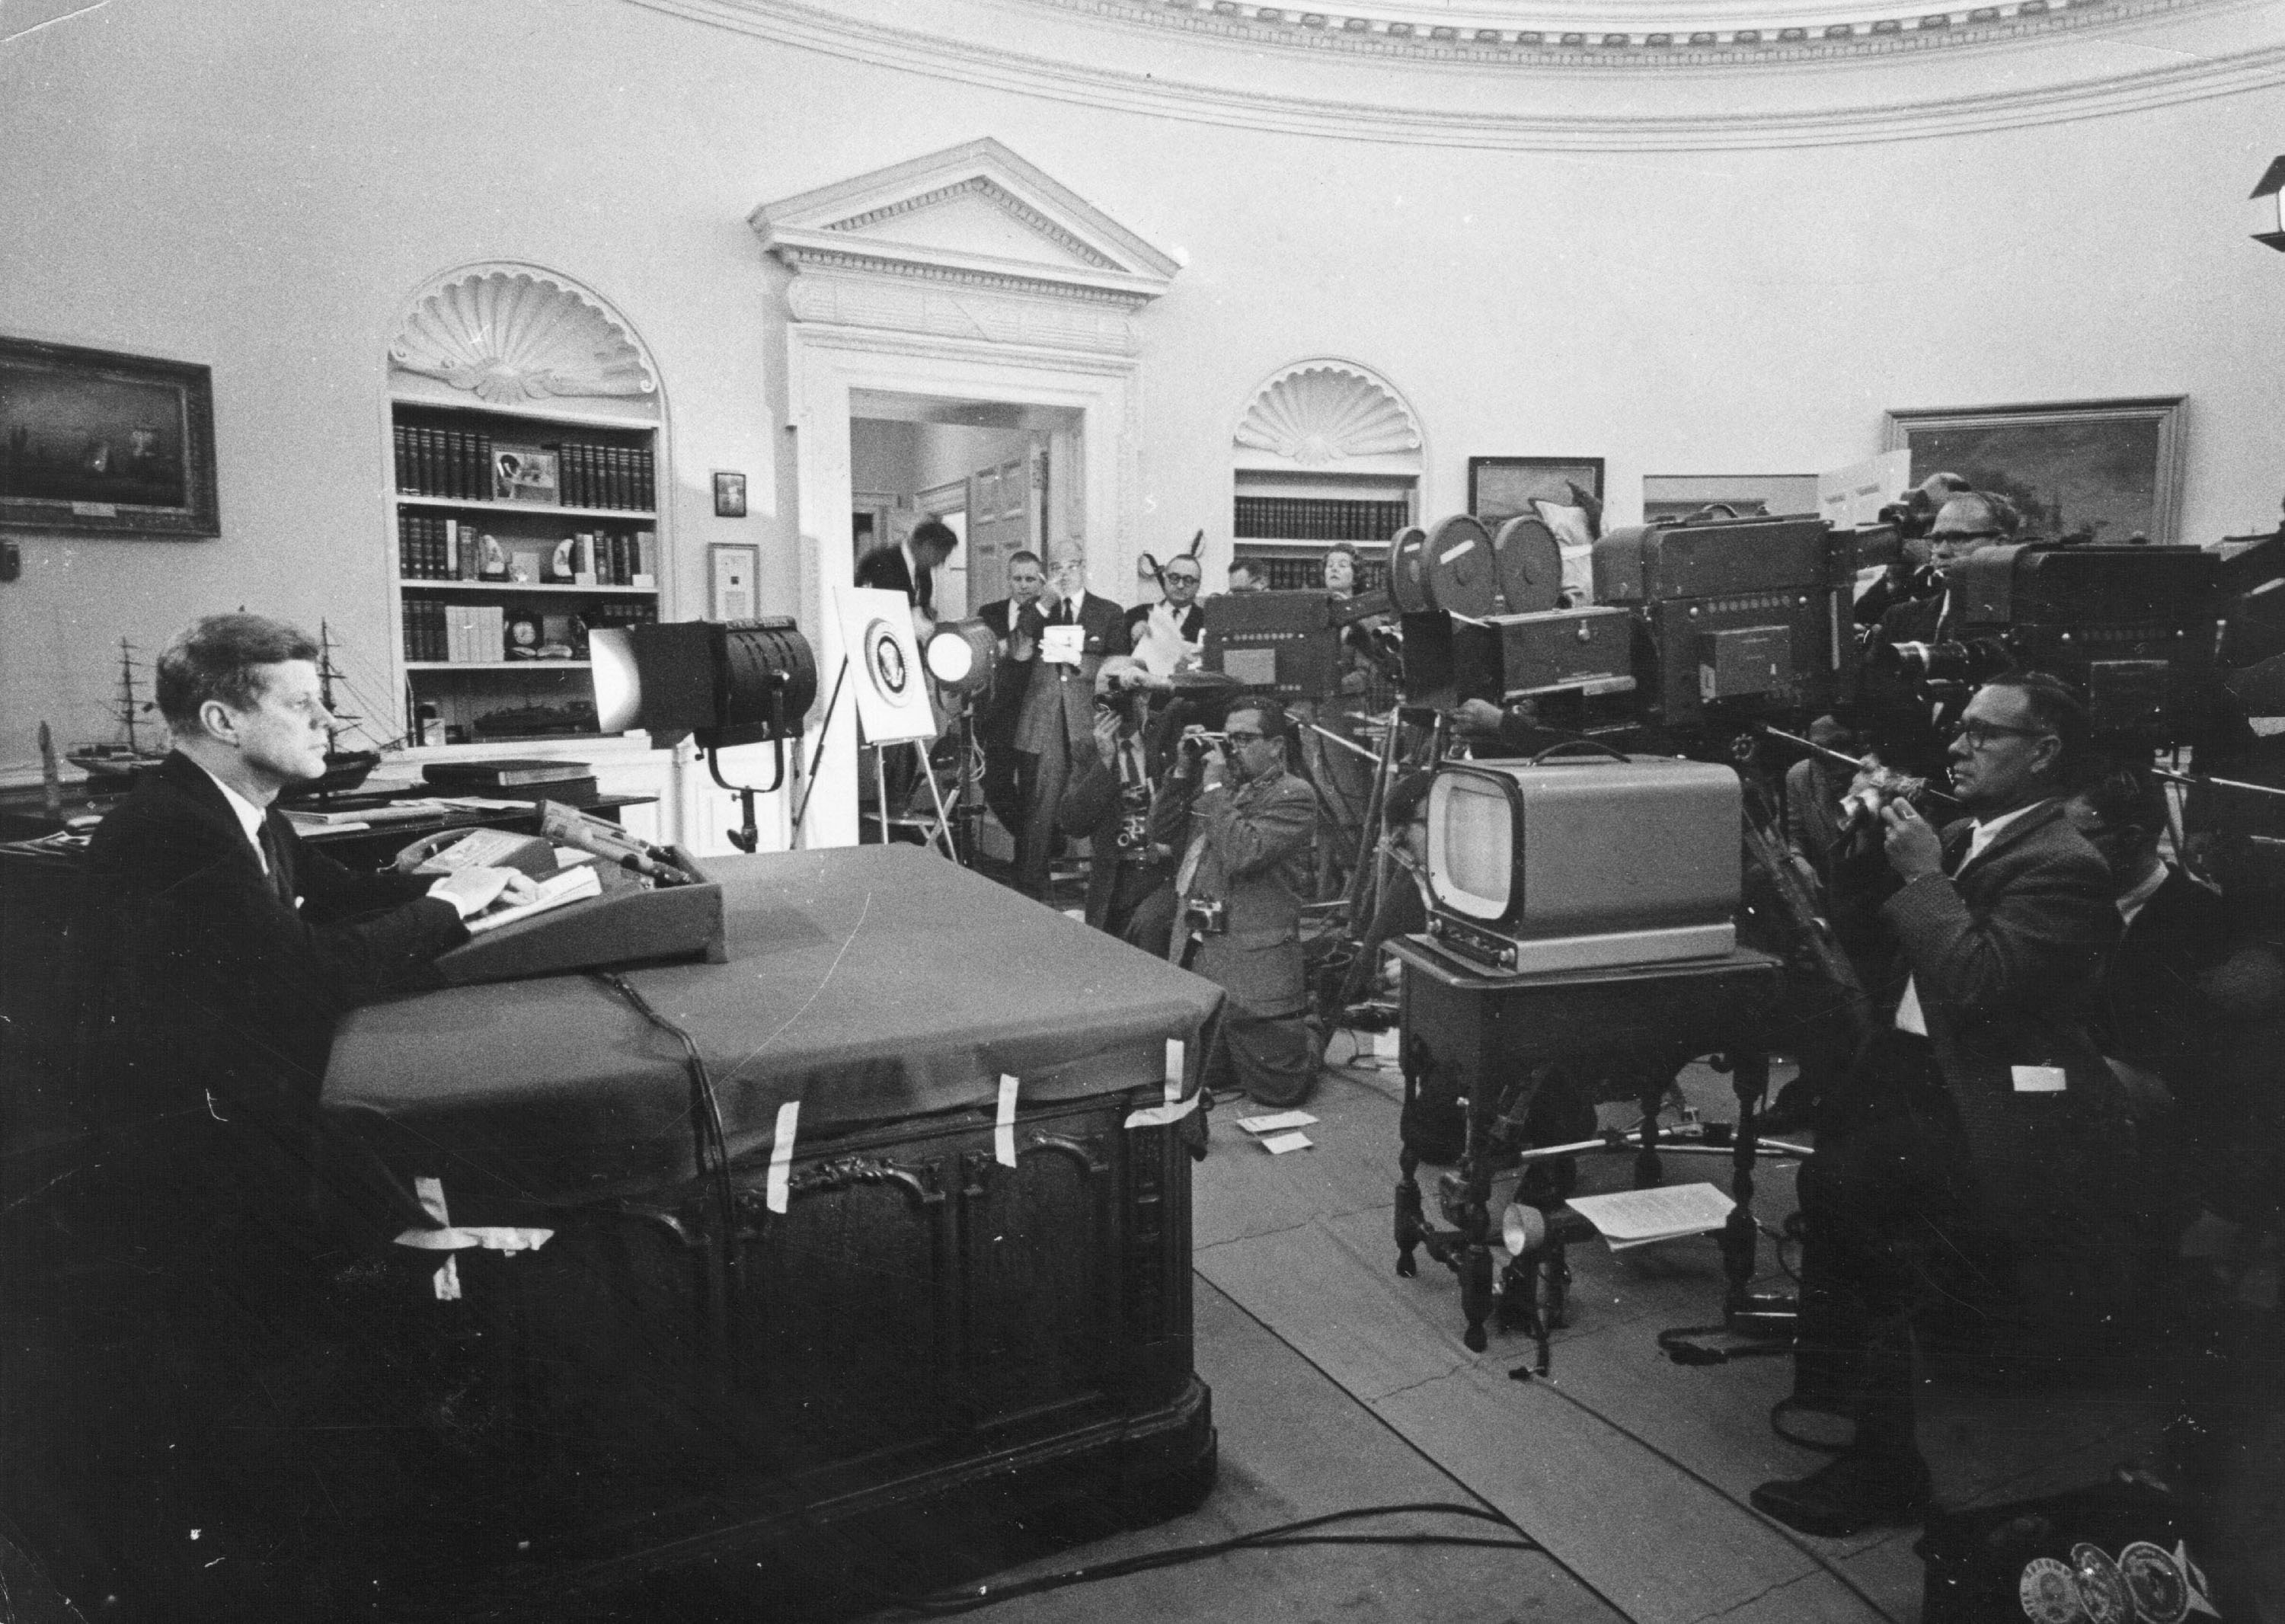 John F. Kennedy In the oval office with TV Cameras